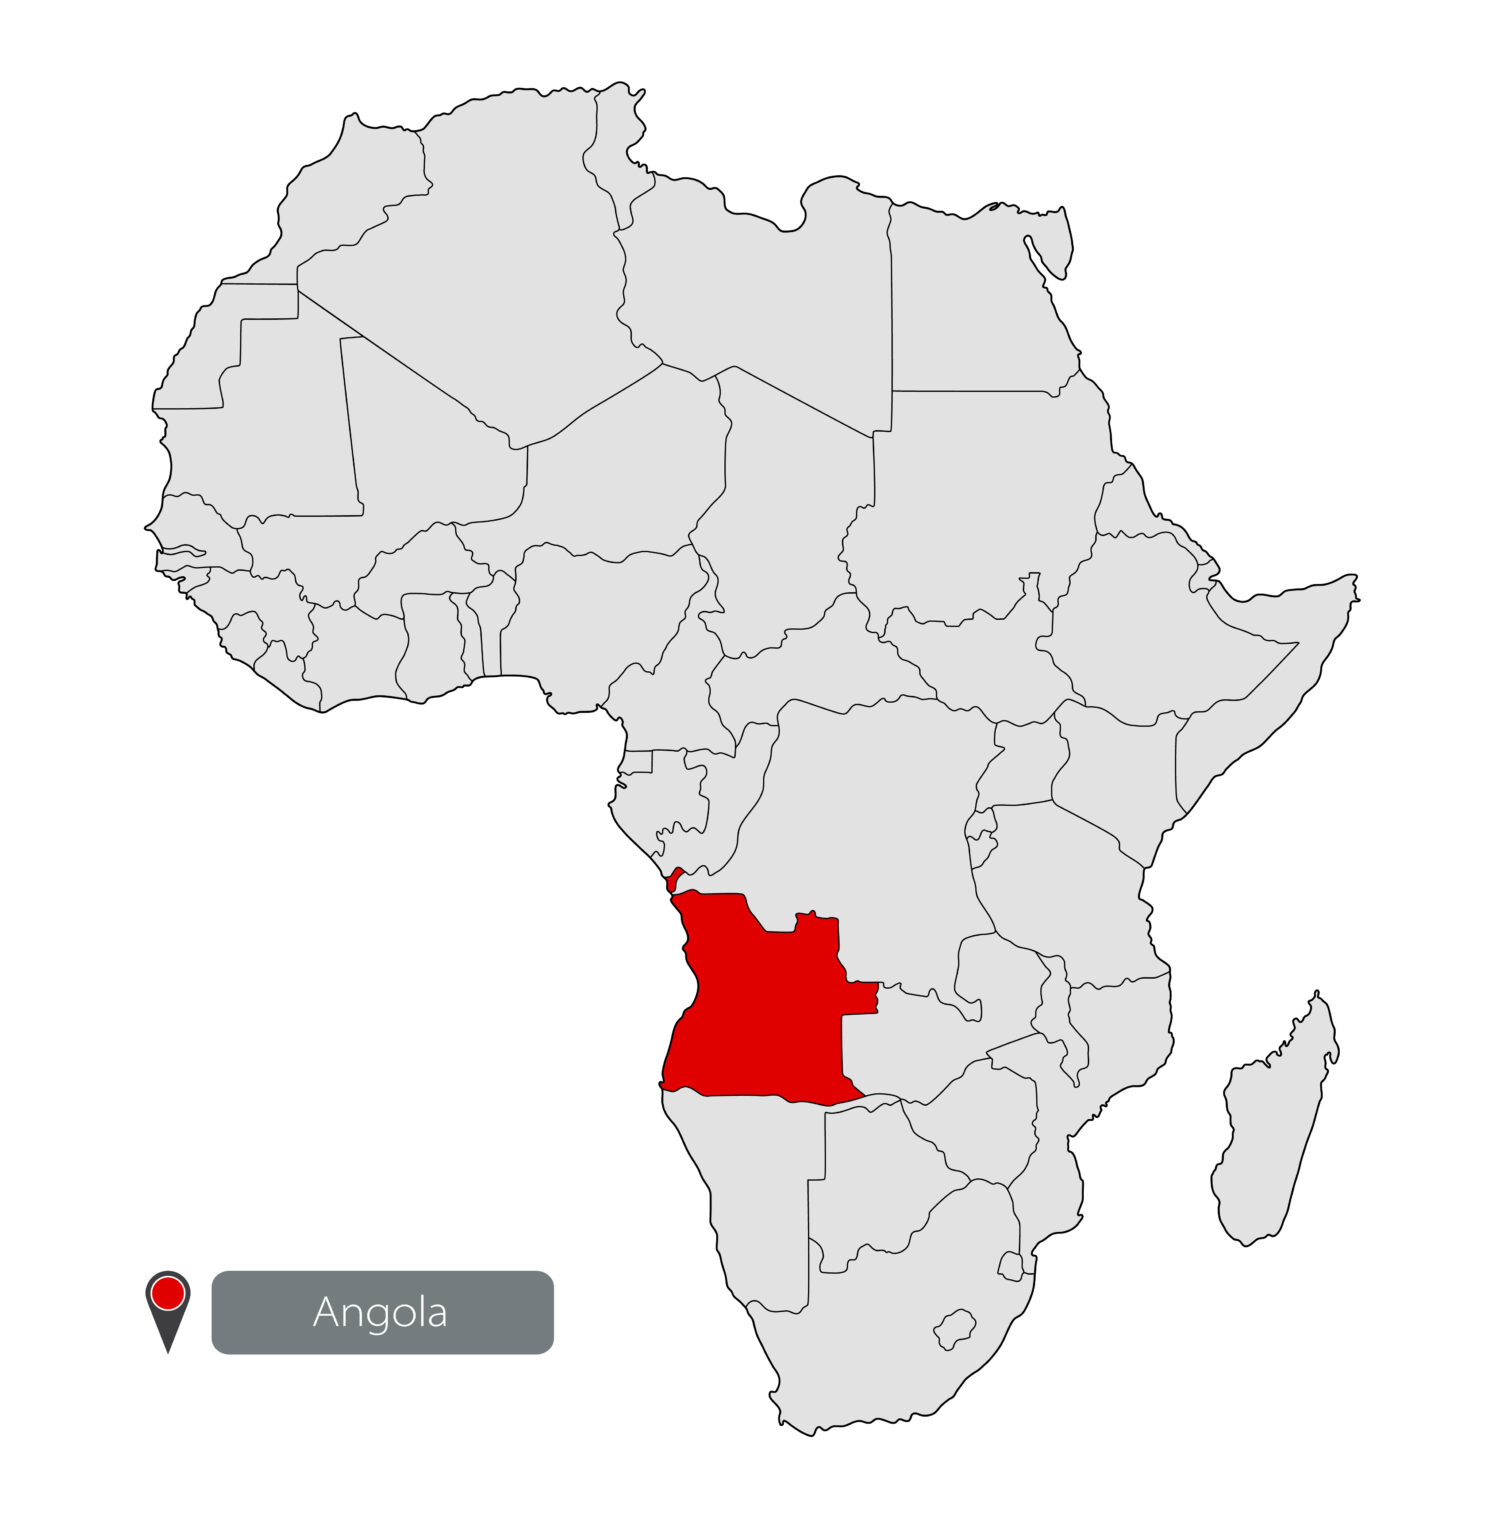 Angola on a map of Africa